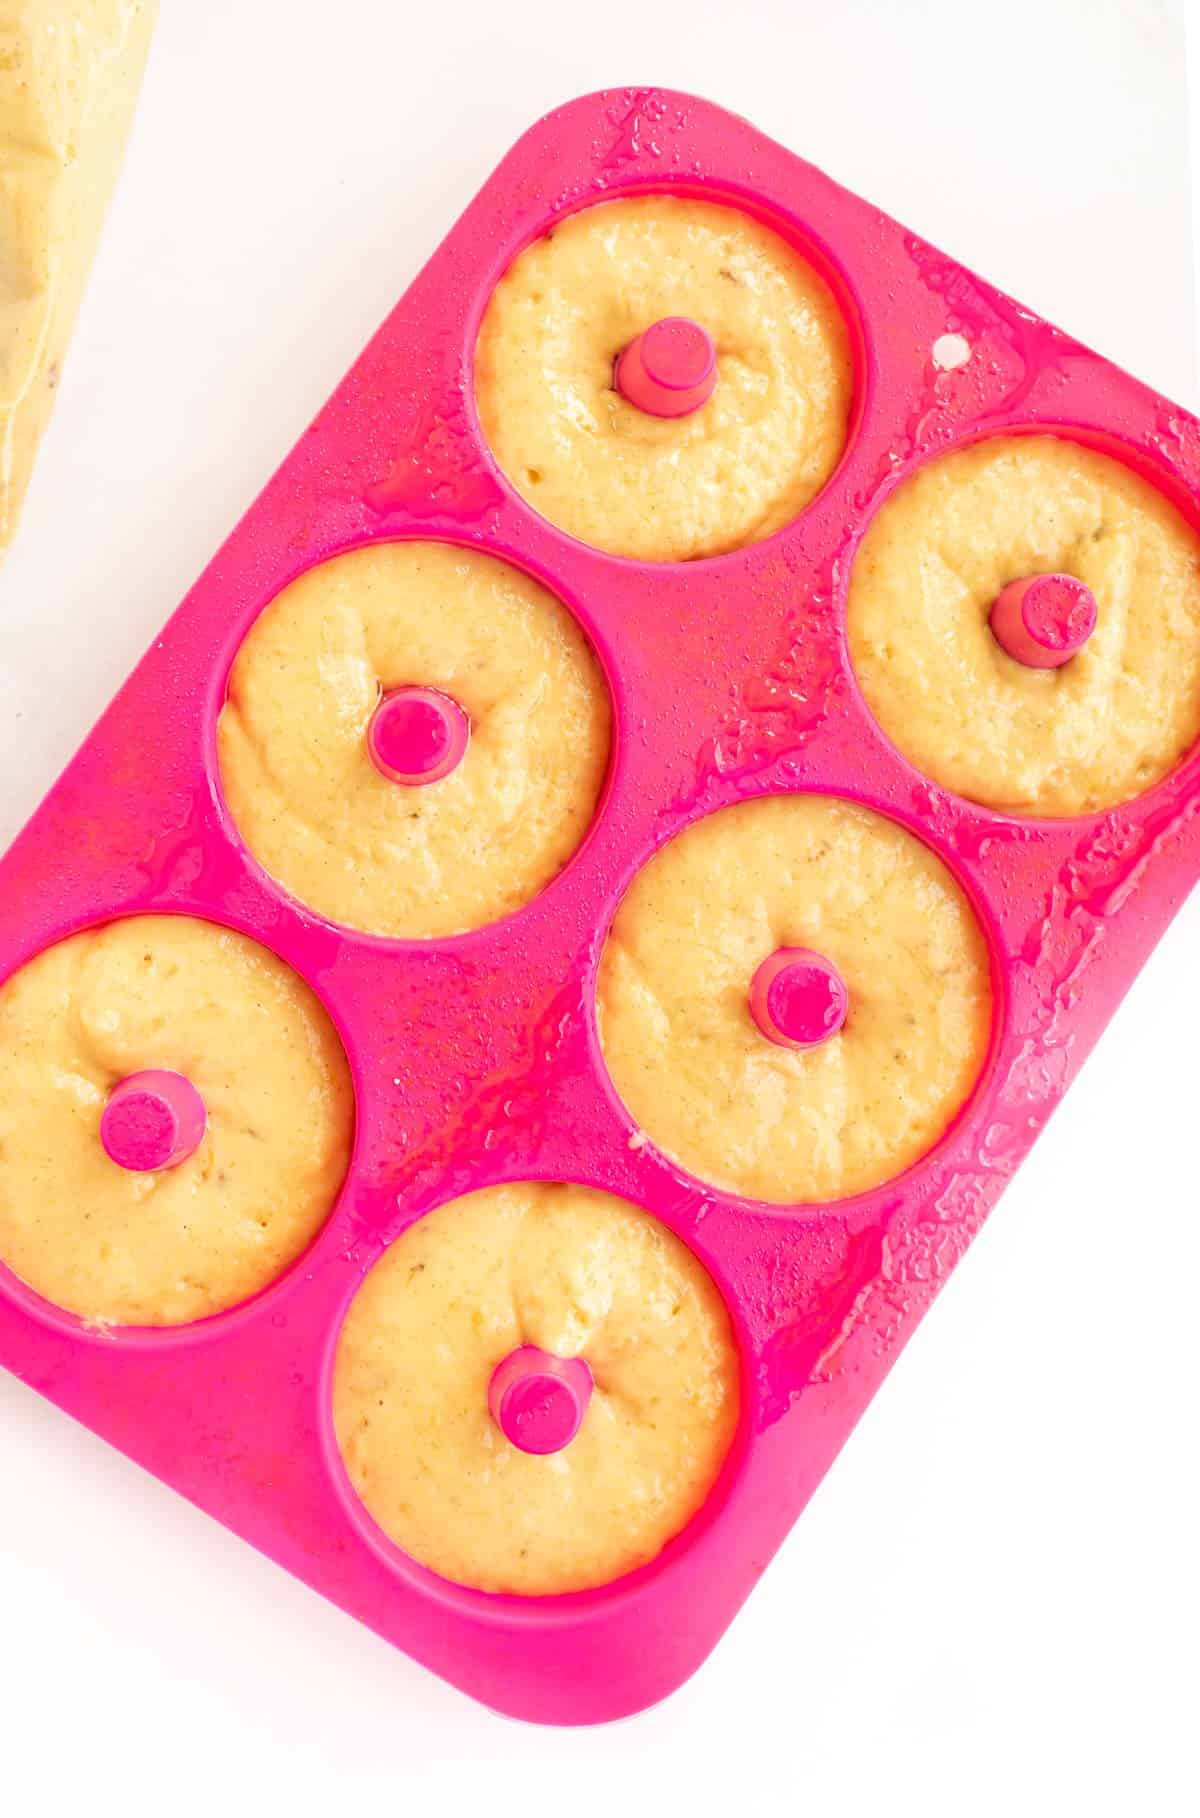 donut batter piped into the wells of a pink silicone donut pan.